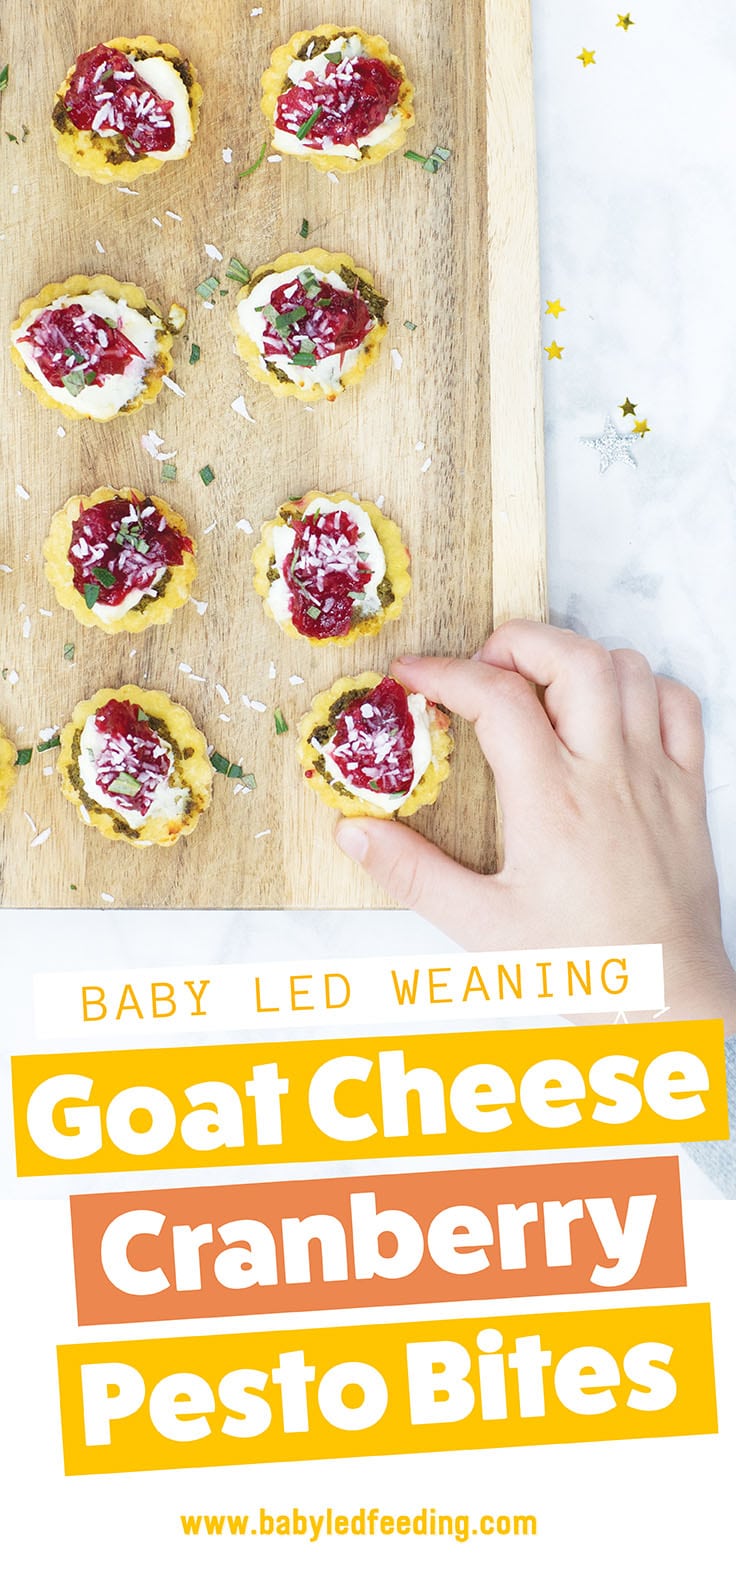 Healthy Christmas Appetizers are not always easy to find... But here is a fresh and super easy appetizer that is safe for babies and toddlers too! Goat cheese, cranberries, pesto and coconut all on top of a fresh baked crust. Merry Christmas! #appetizer #christmasrecipe #babyledweaning